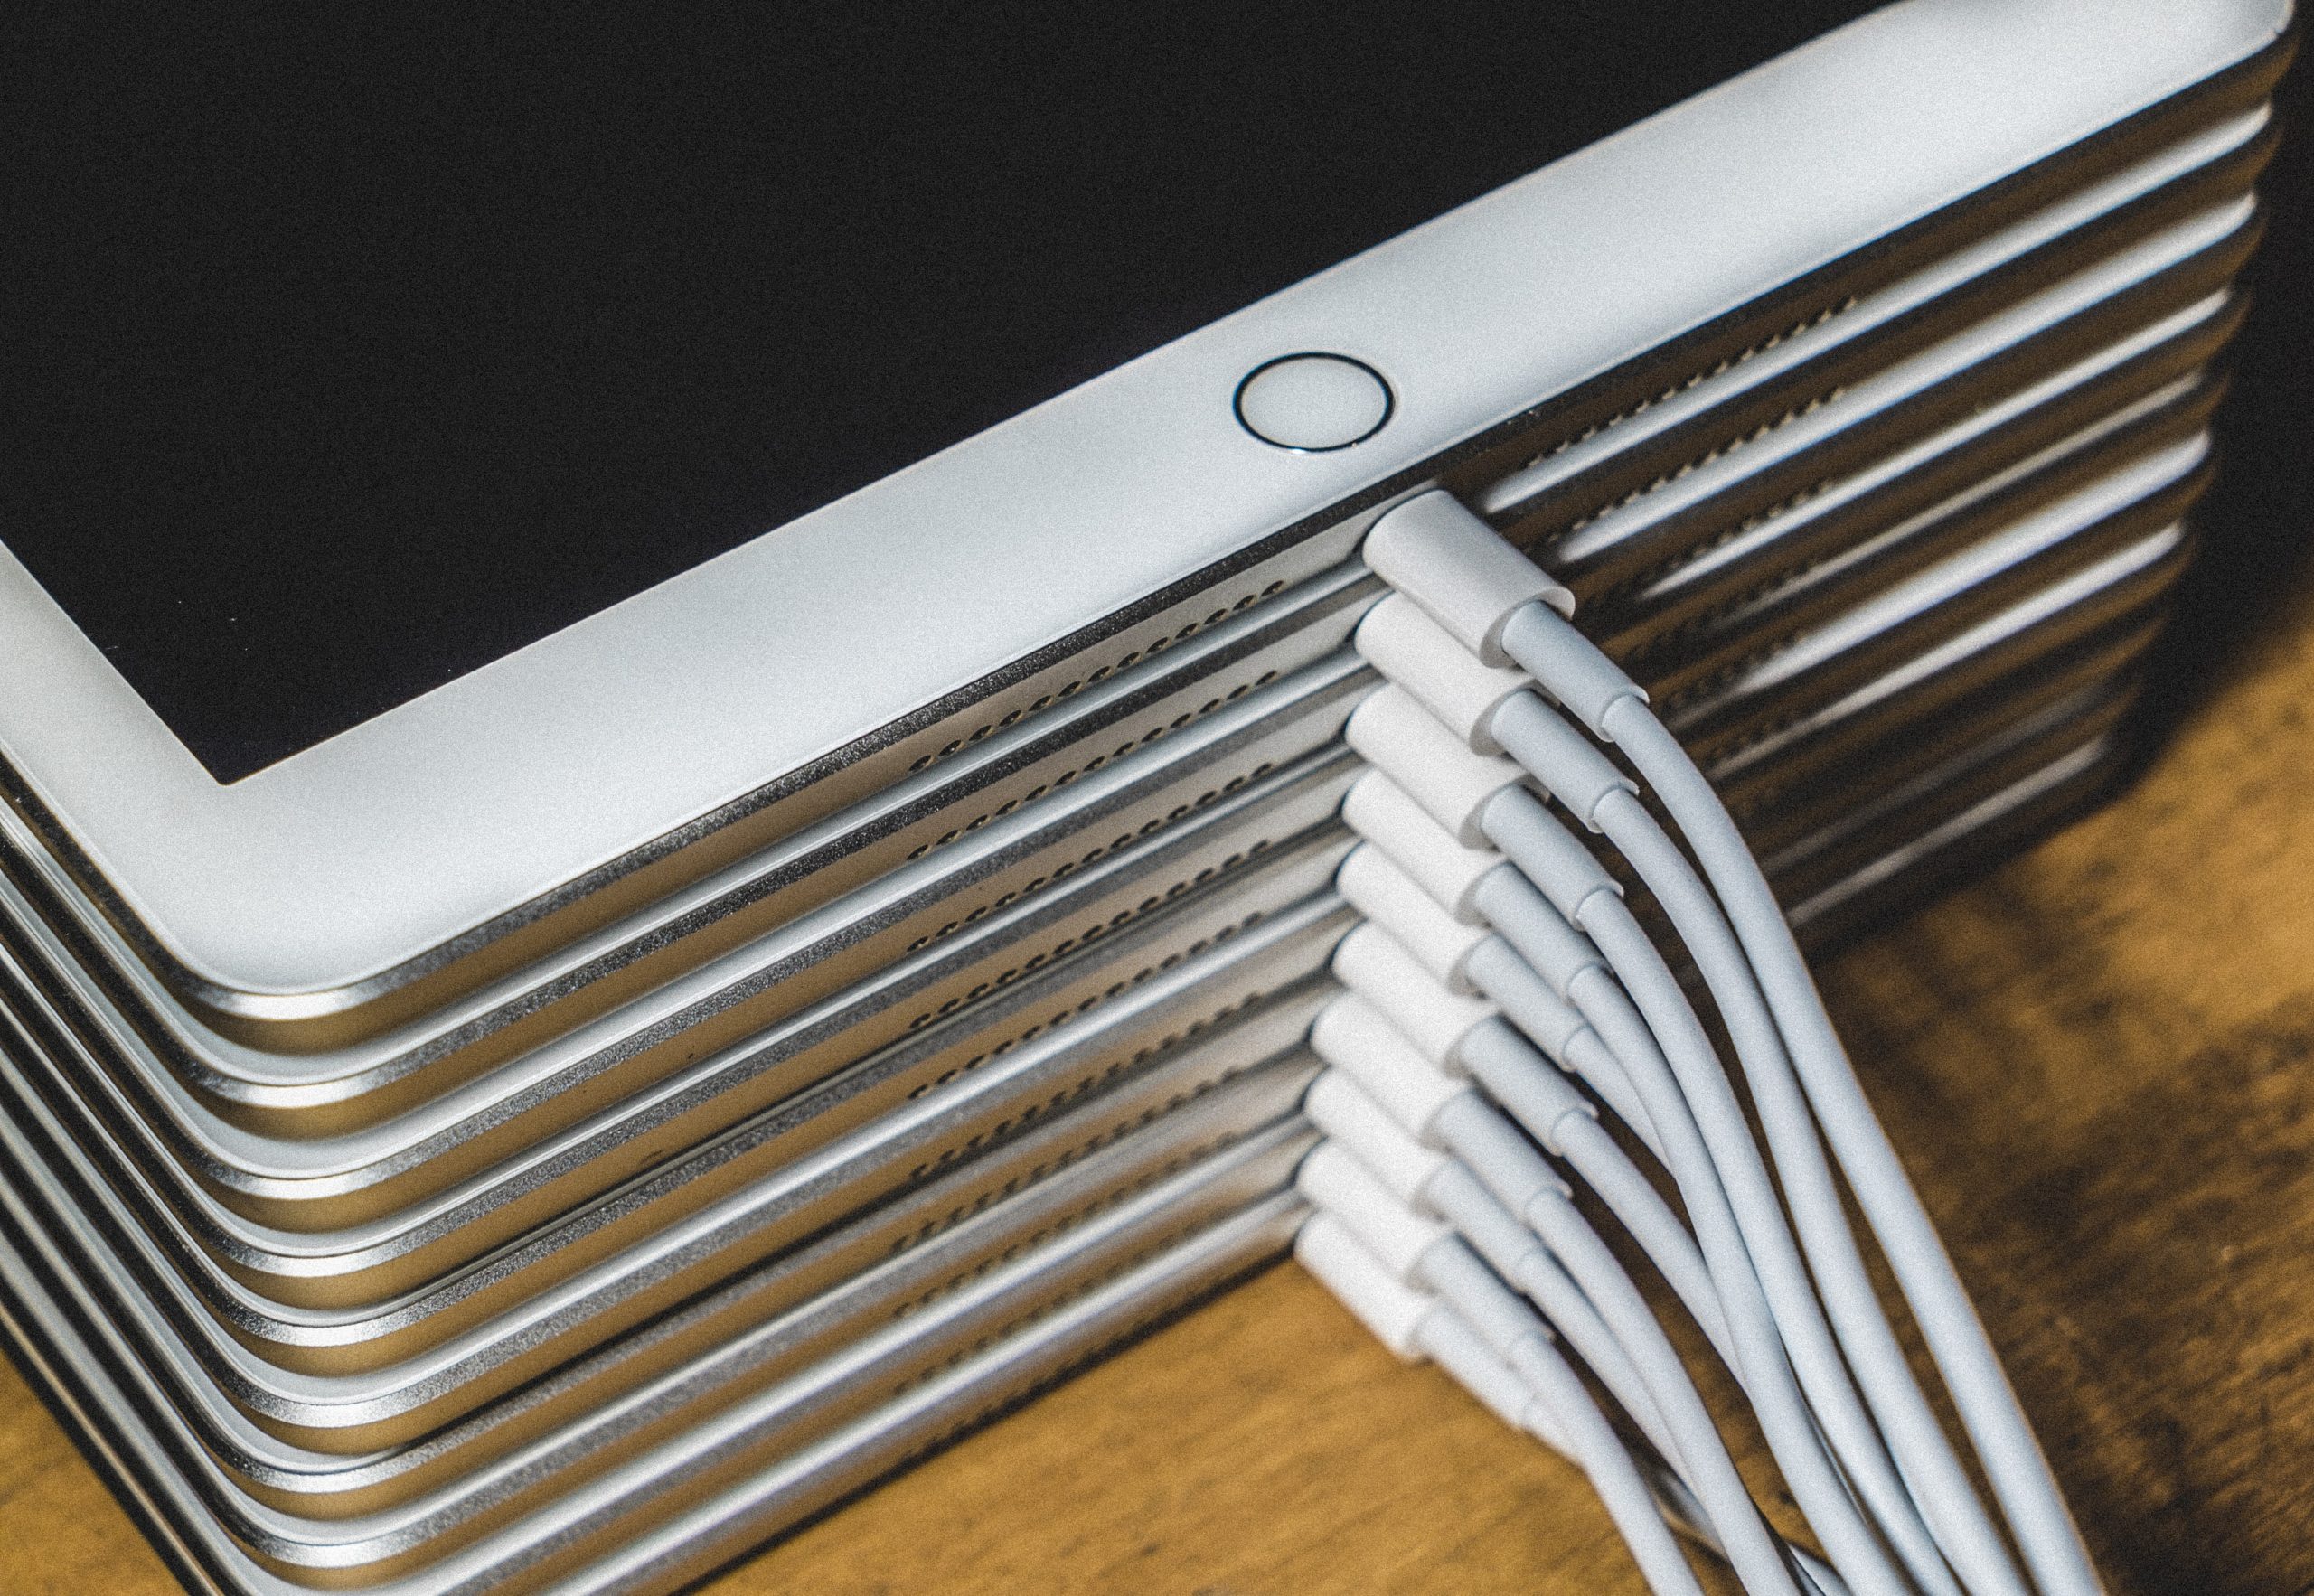 30 Easy Tips To Extend Your iPad’s Battery Life